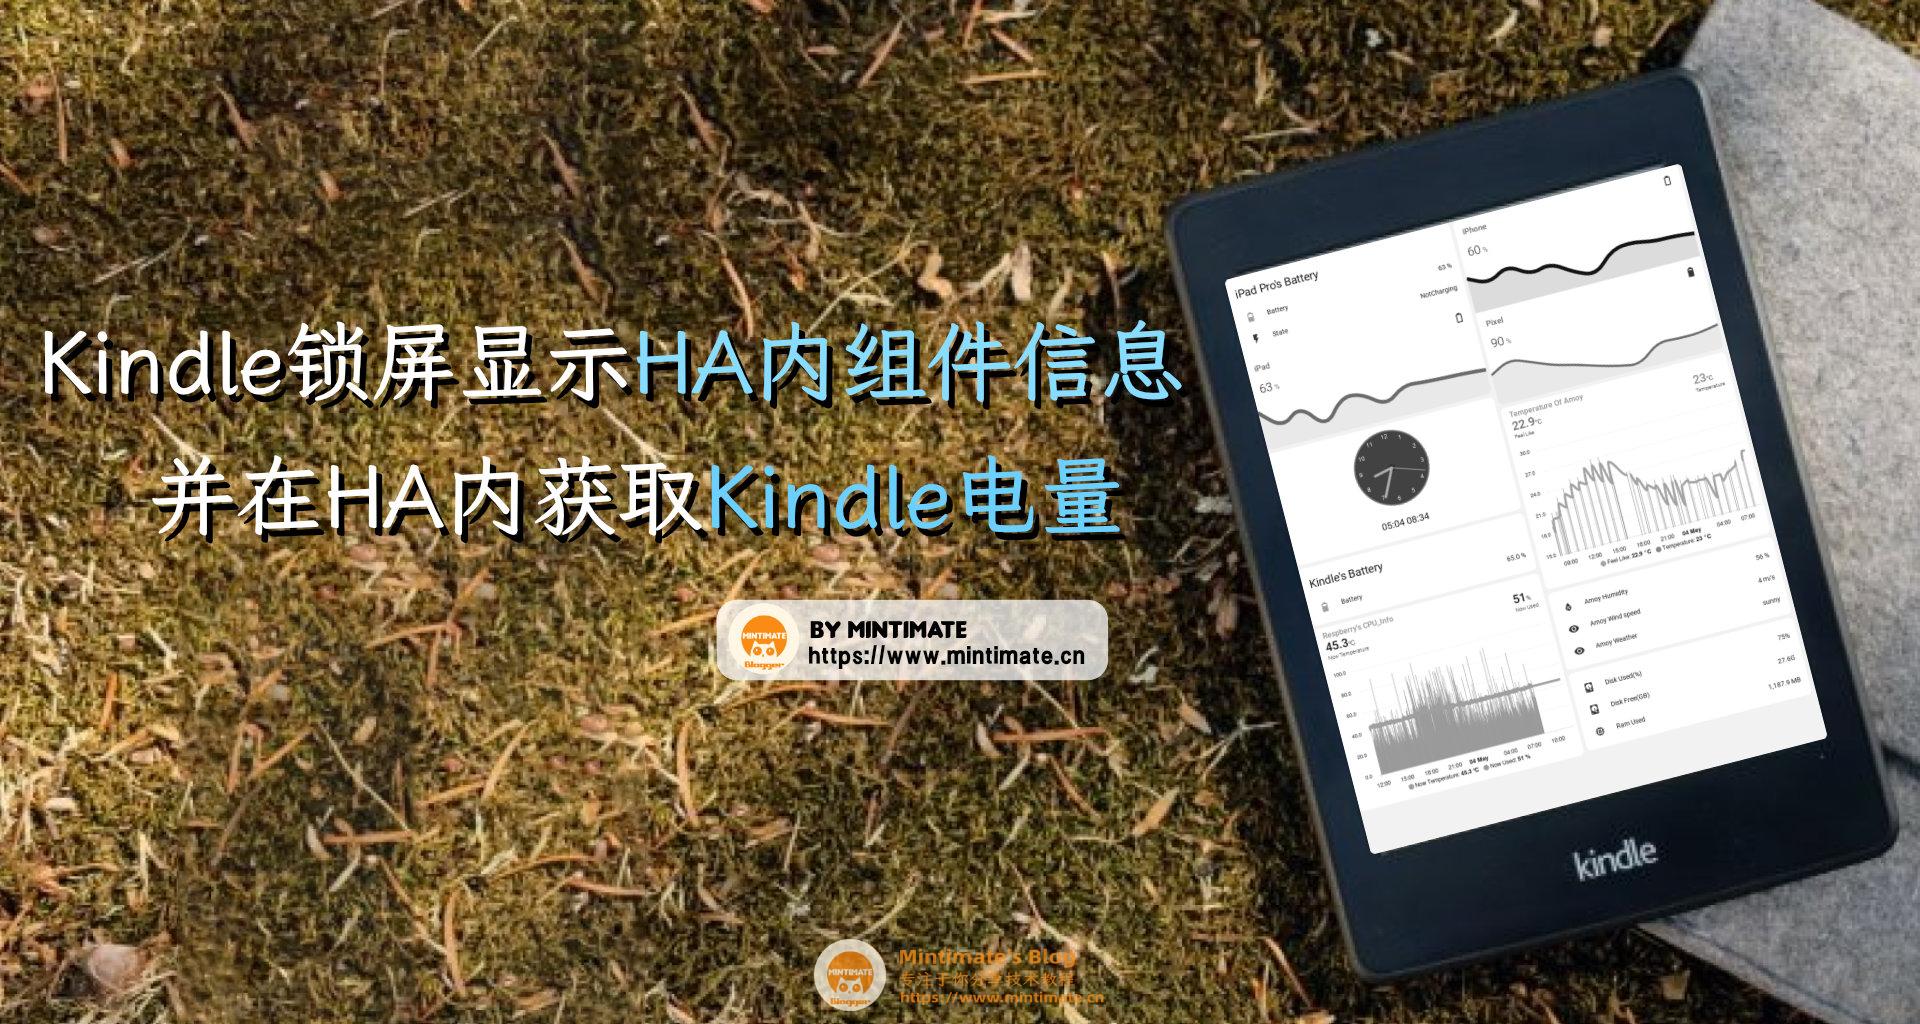 Kindle锁屏显示HomeAssistant内组件信息，并在HomeAssistant内获取Kindle电量